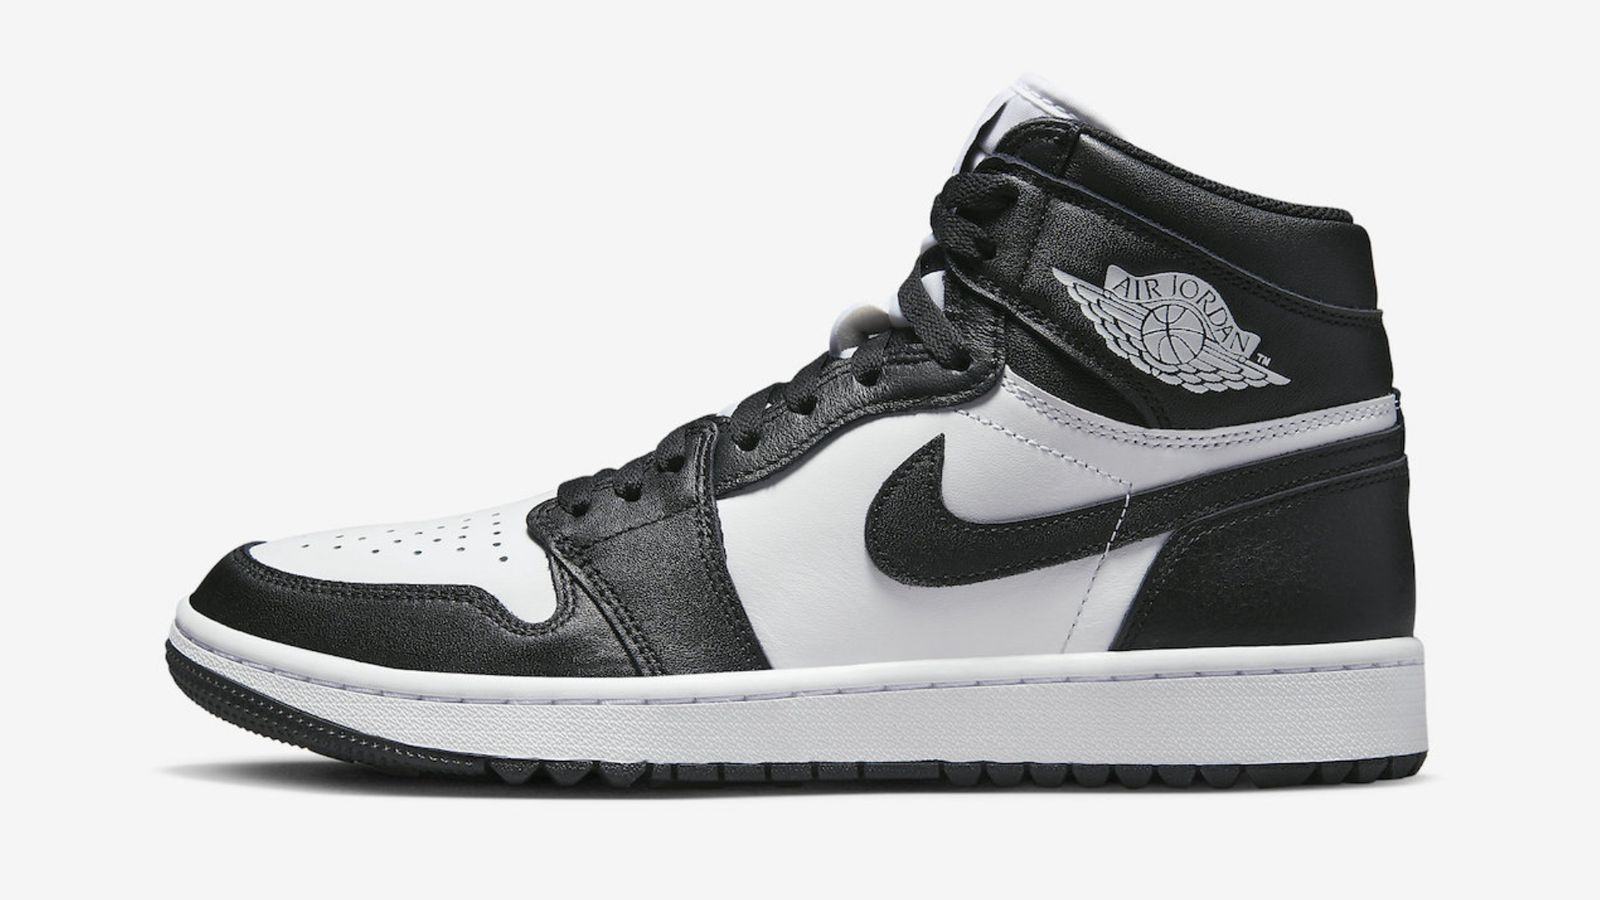 Air Jordan 1 High Golf "Black White" product image of a pair of black and white high-top golf shoes.